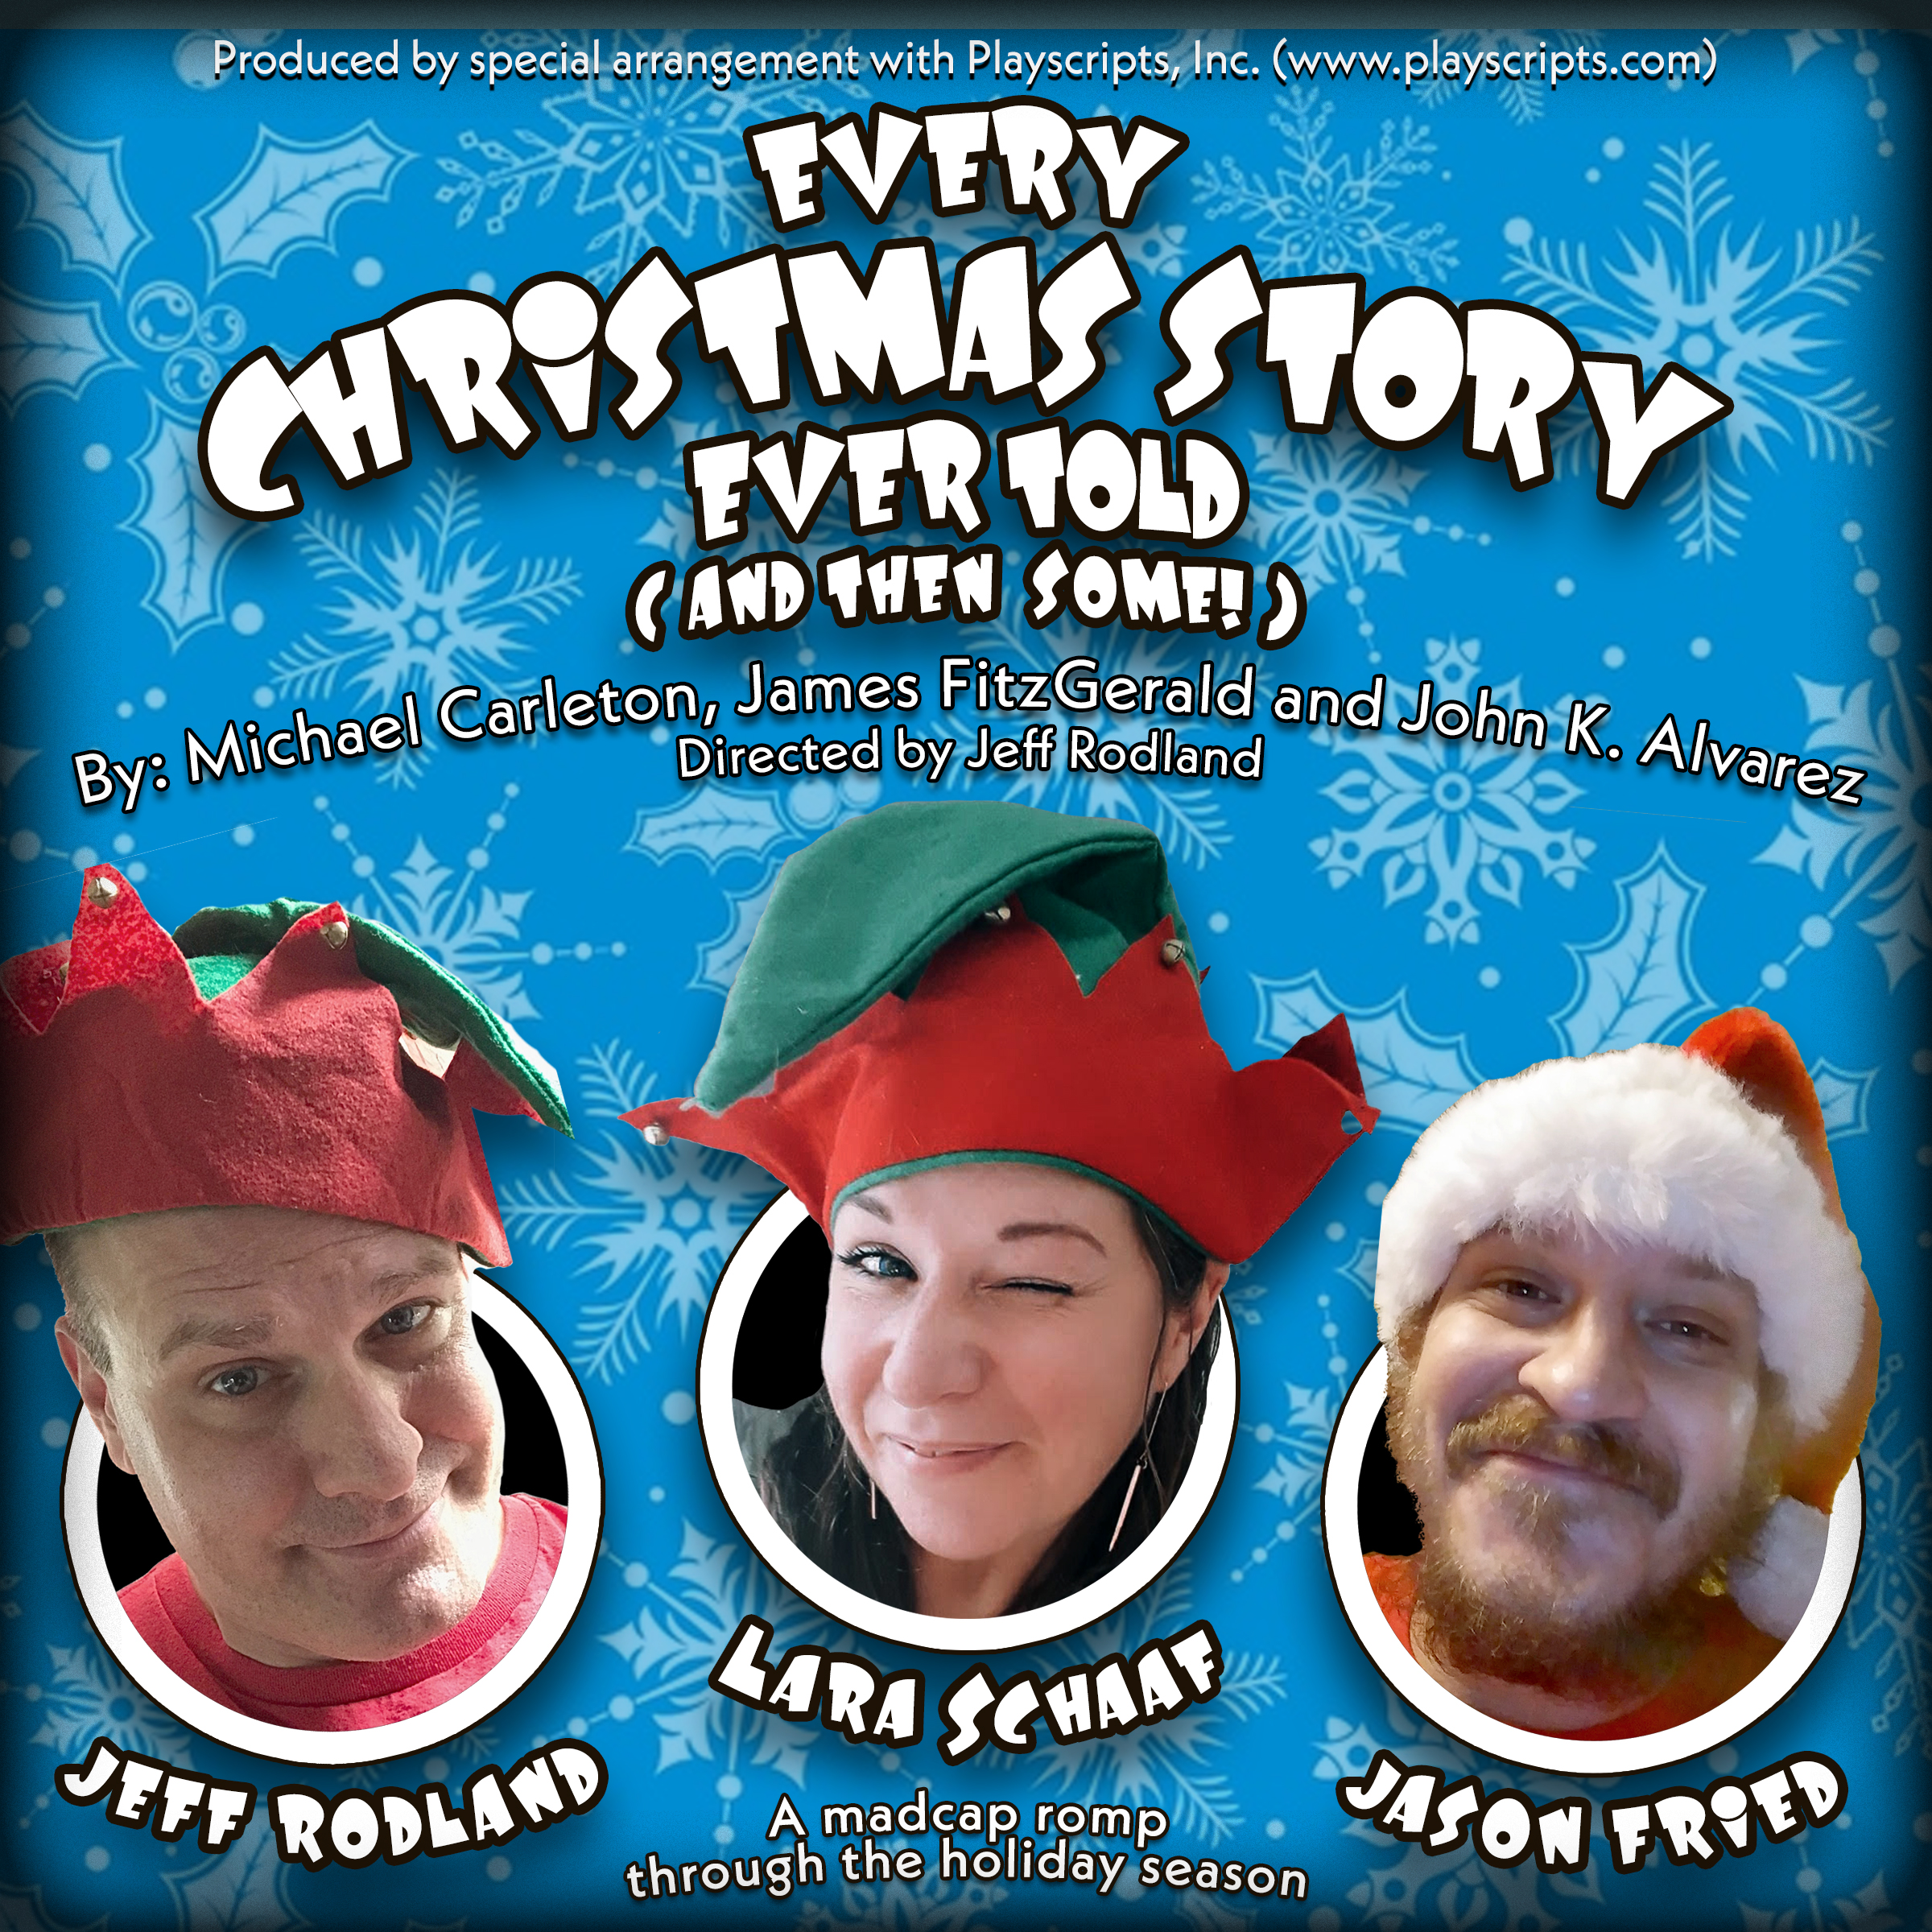 Every Christmas Story Ever Told (and then some!)